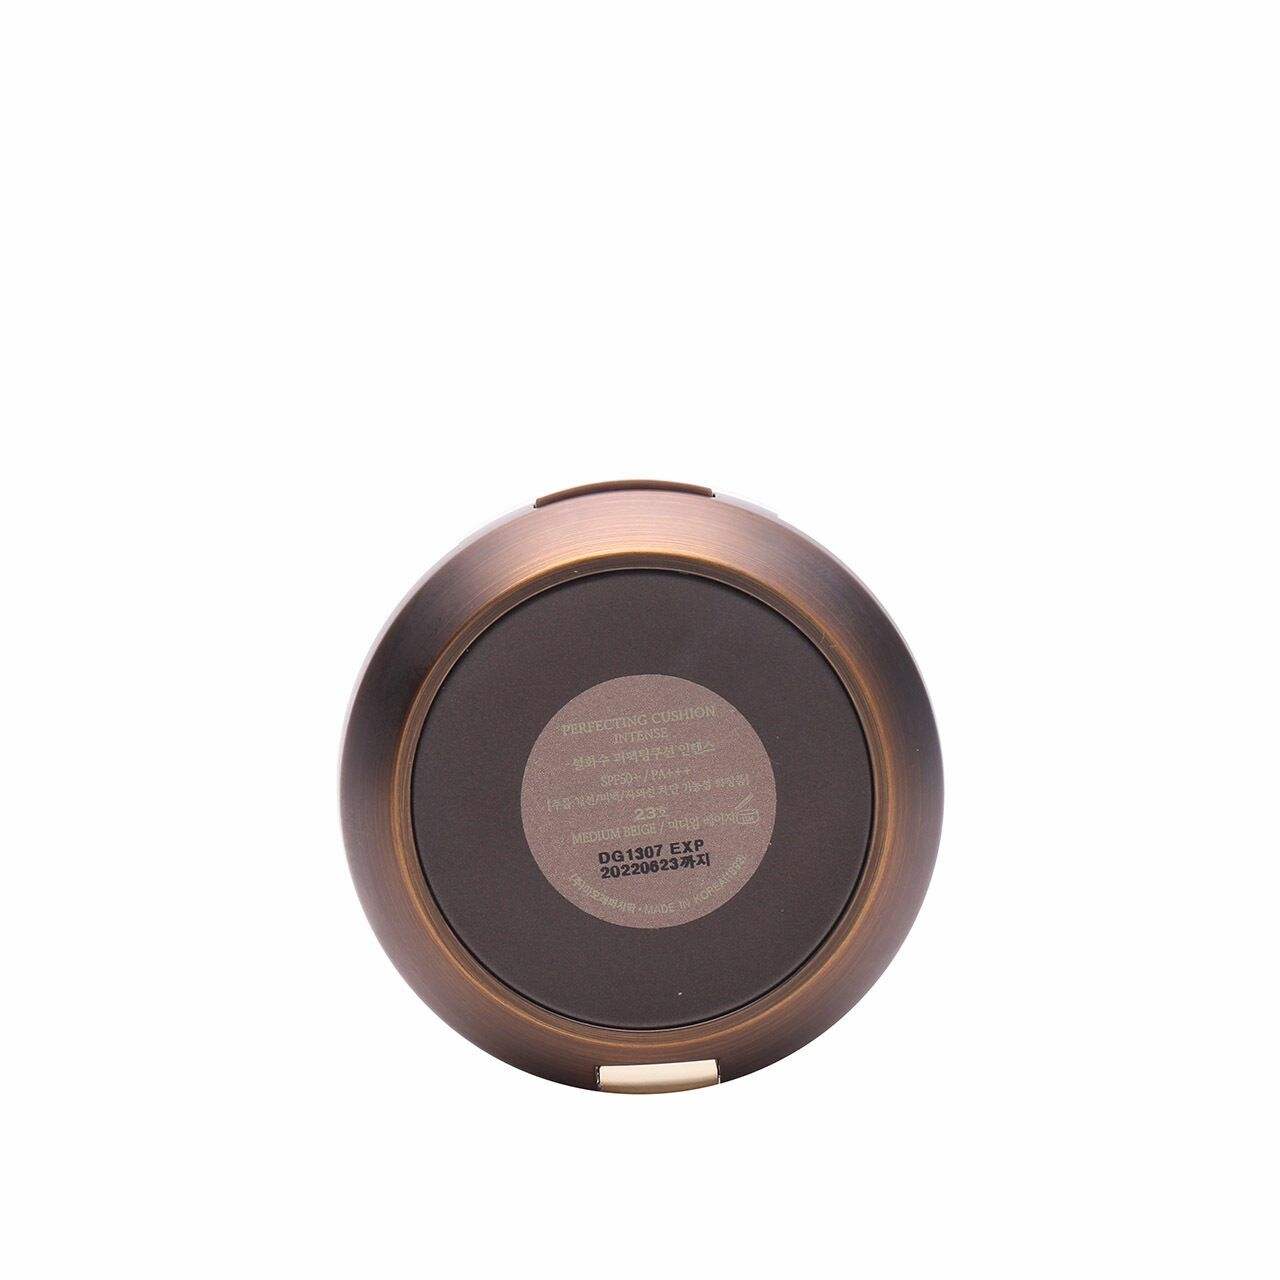 Sulwhasoo Perfecting Cushion Intense 23 Faces